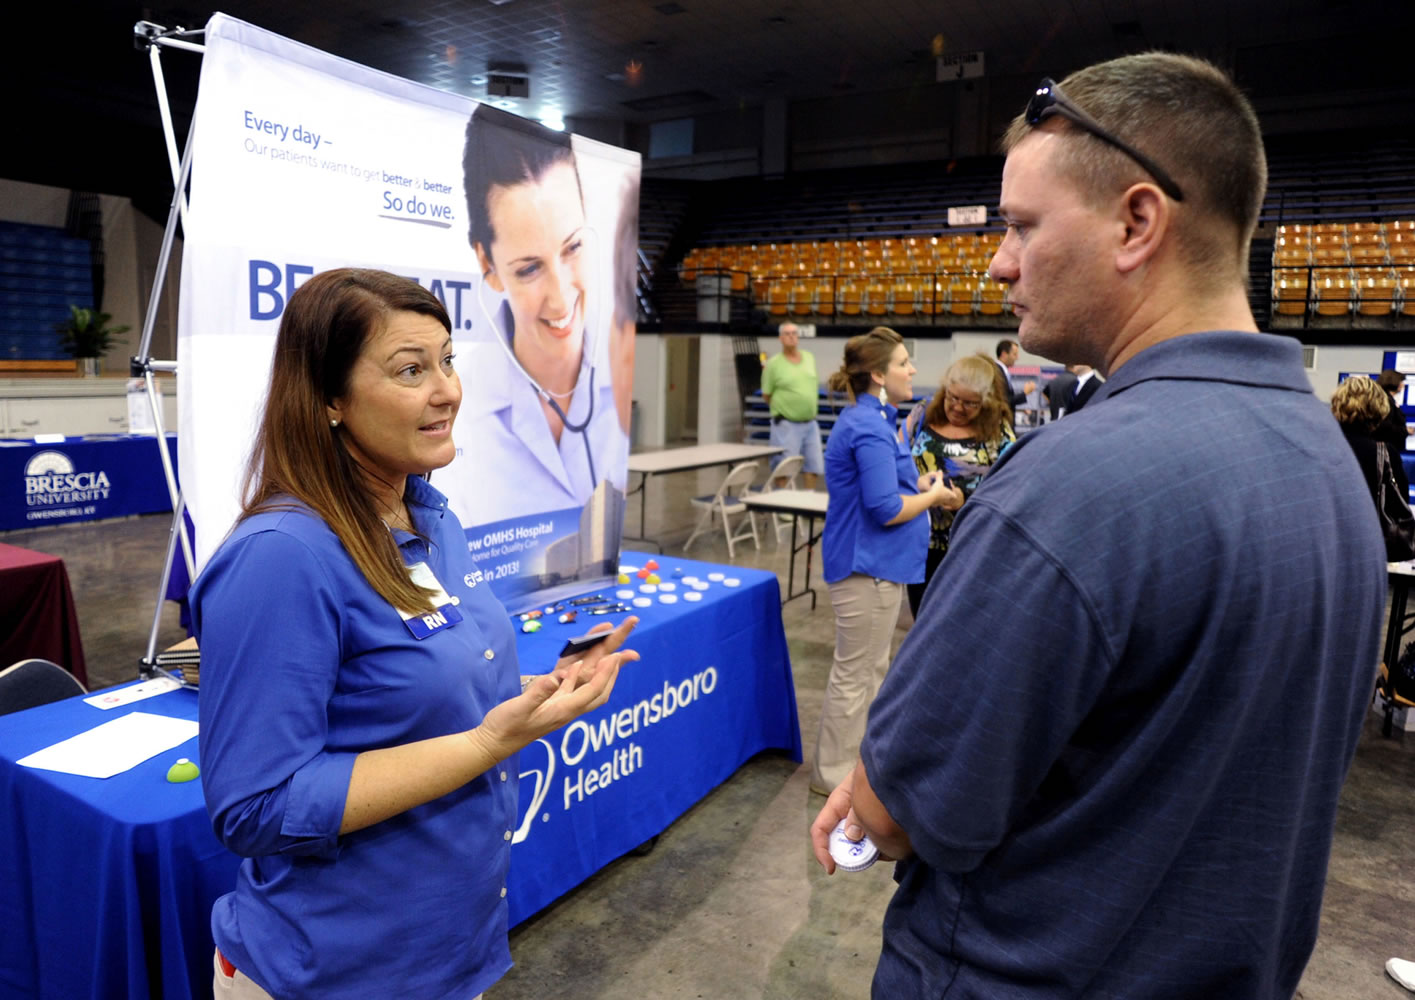 Registered nurse Salanda Bowman, left, talks with part-time Kentucky Wesleyan College student Jason Ward, of Whitesville, about job openings at the Owensboro Health Regional Hospital during a Regional Career and Job Fair in the Owensboro Sports Center in Owensboro, Ky.